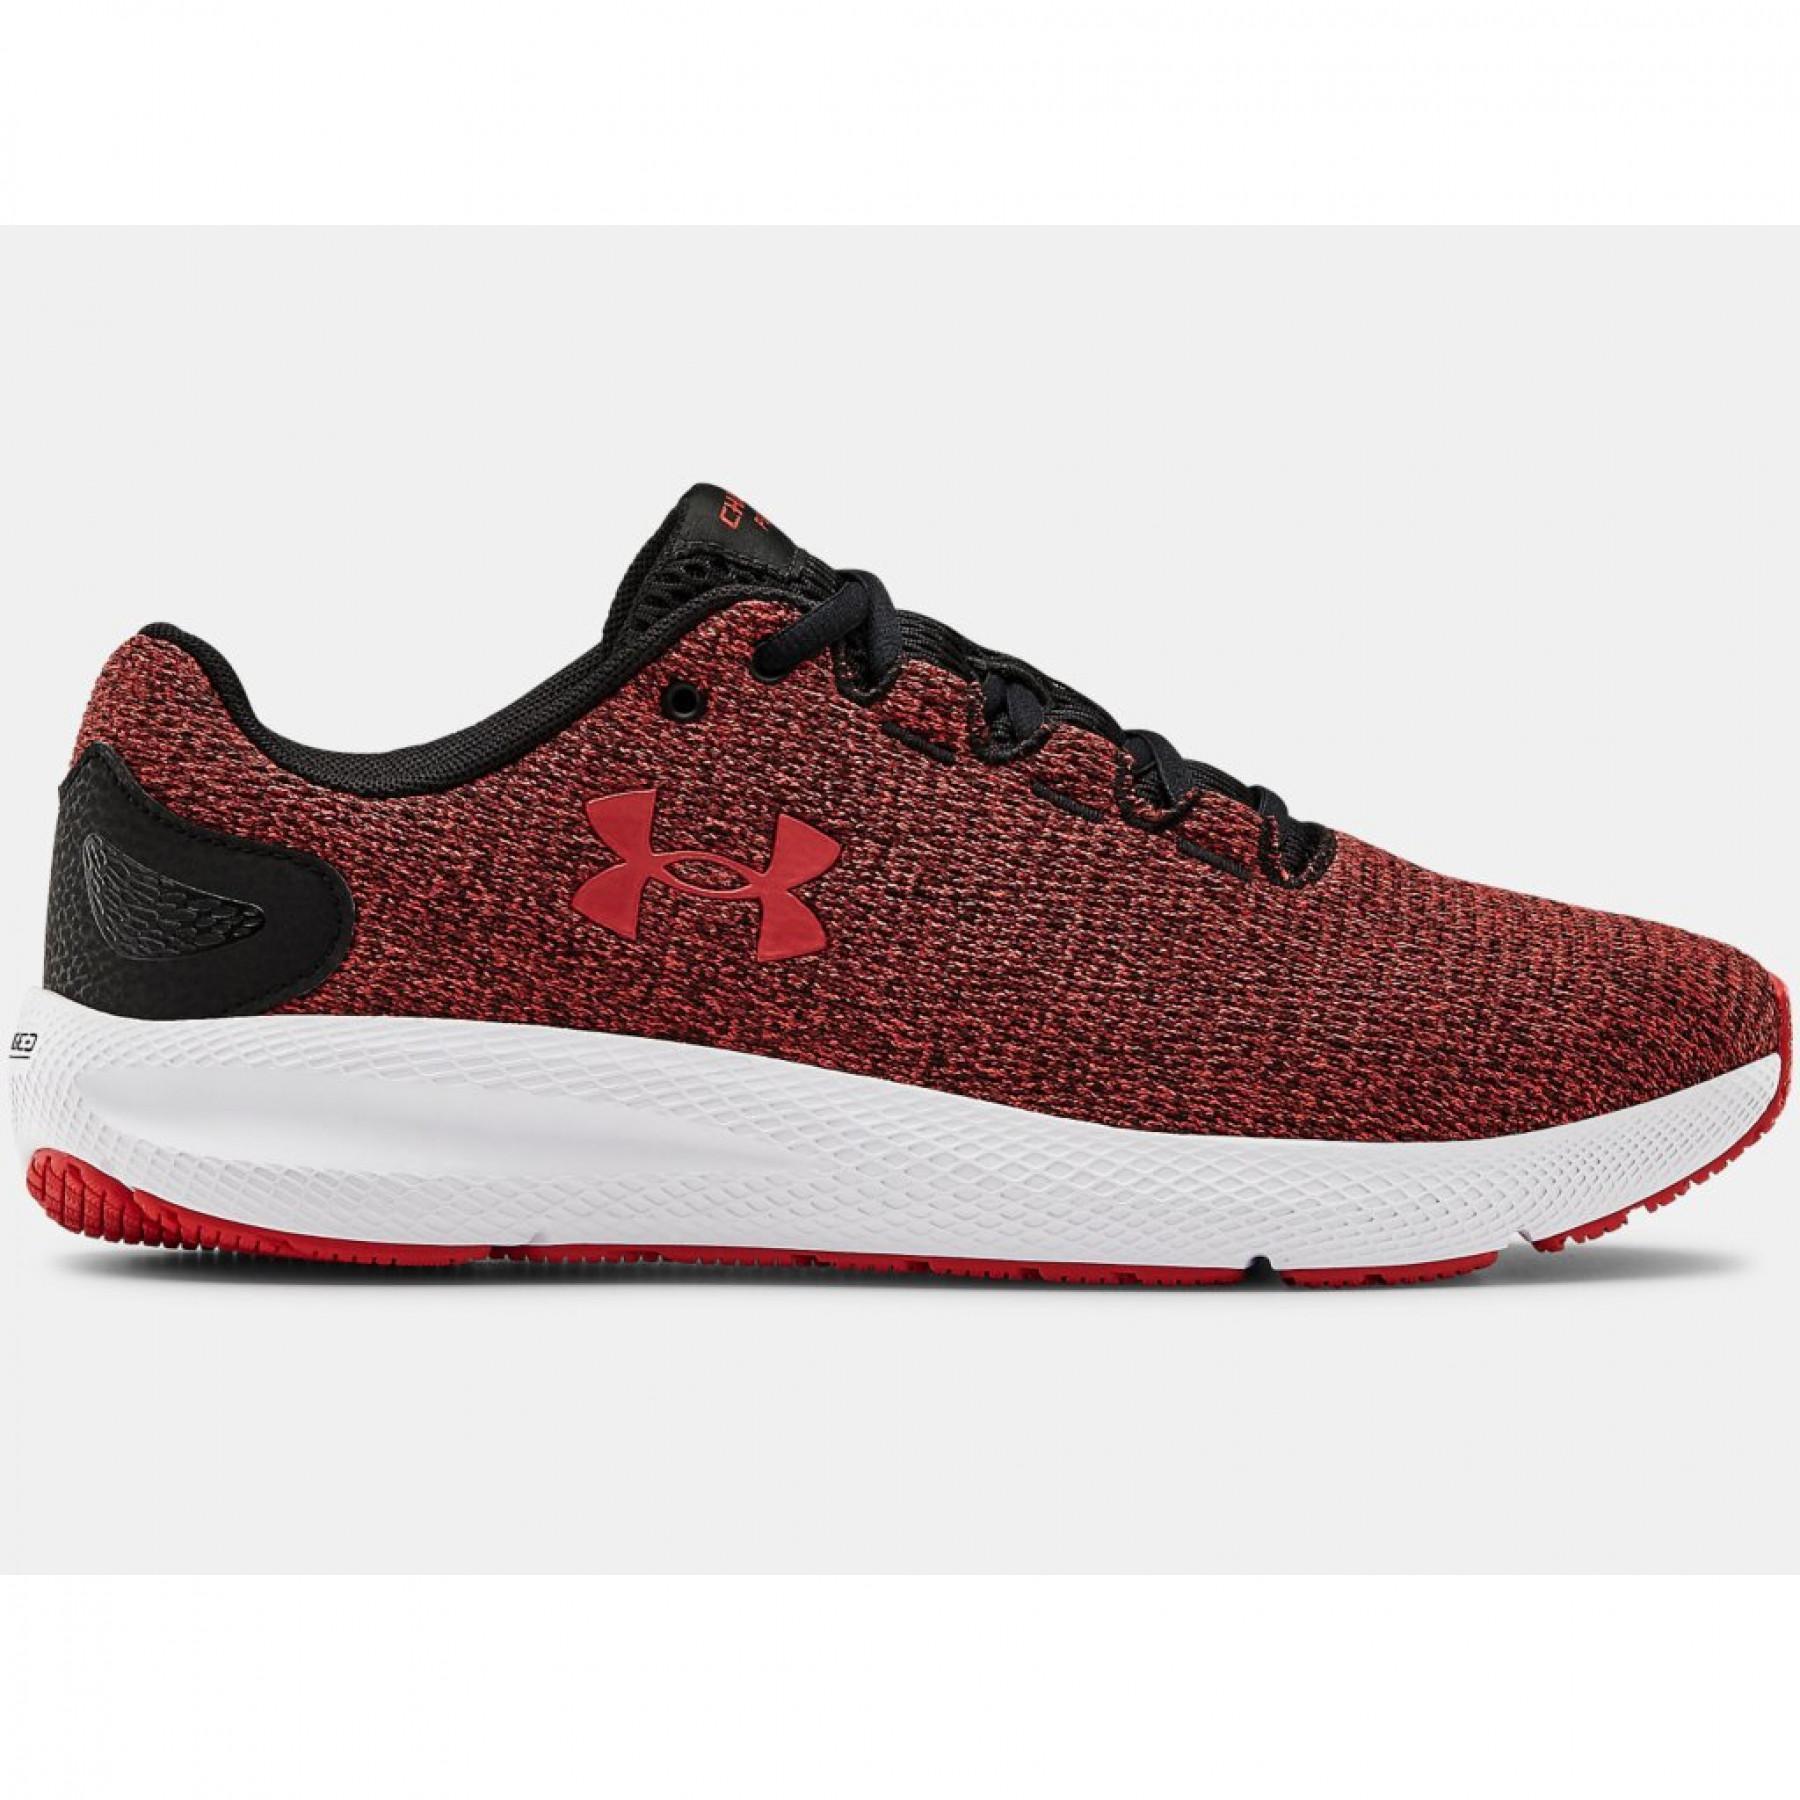 Chaussures de running Under Armour Charged Pursuit 2 Twist